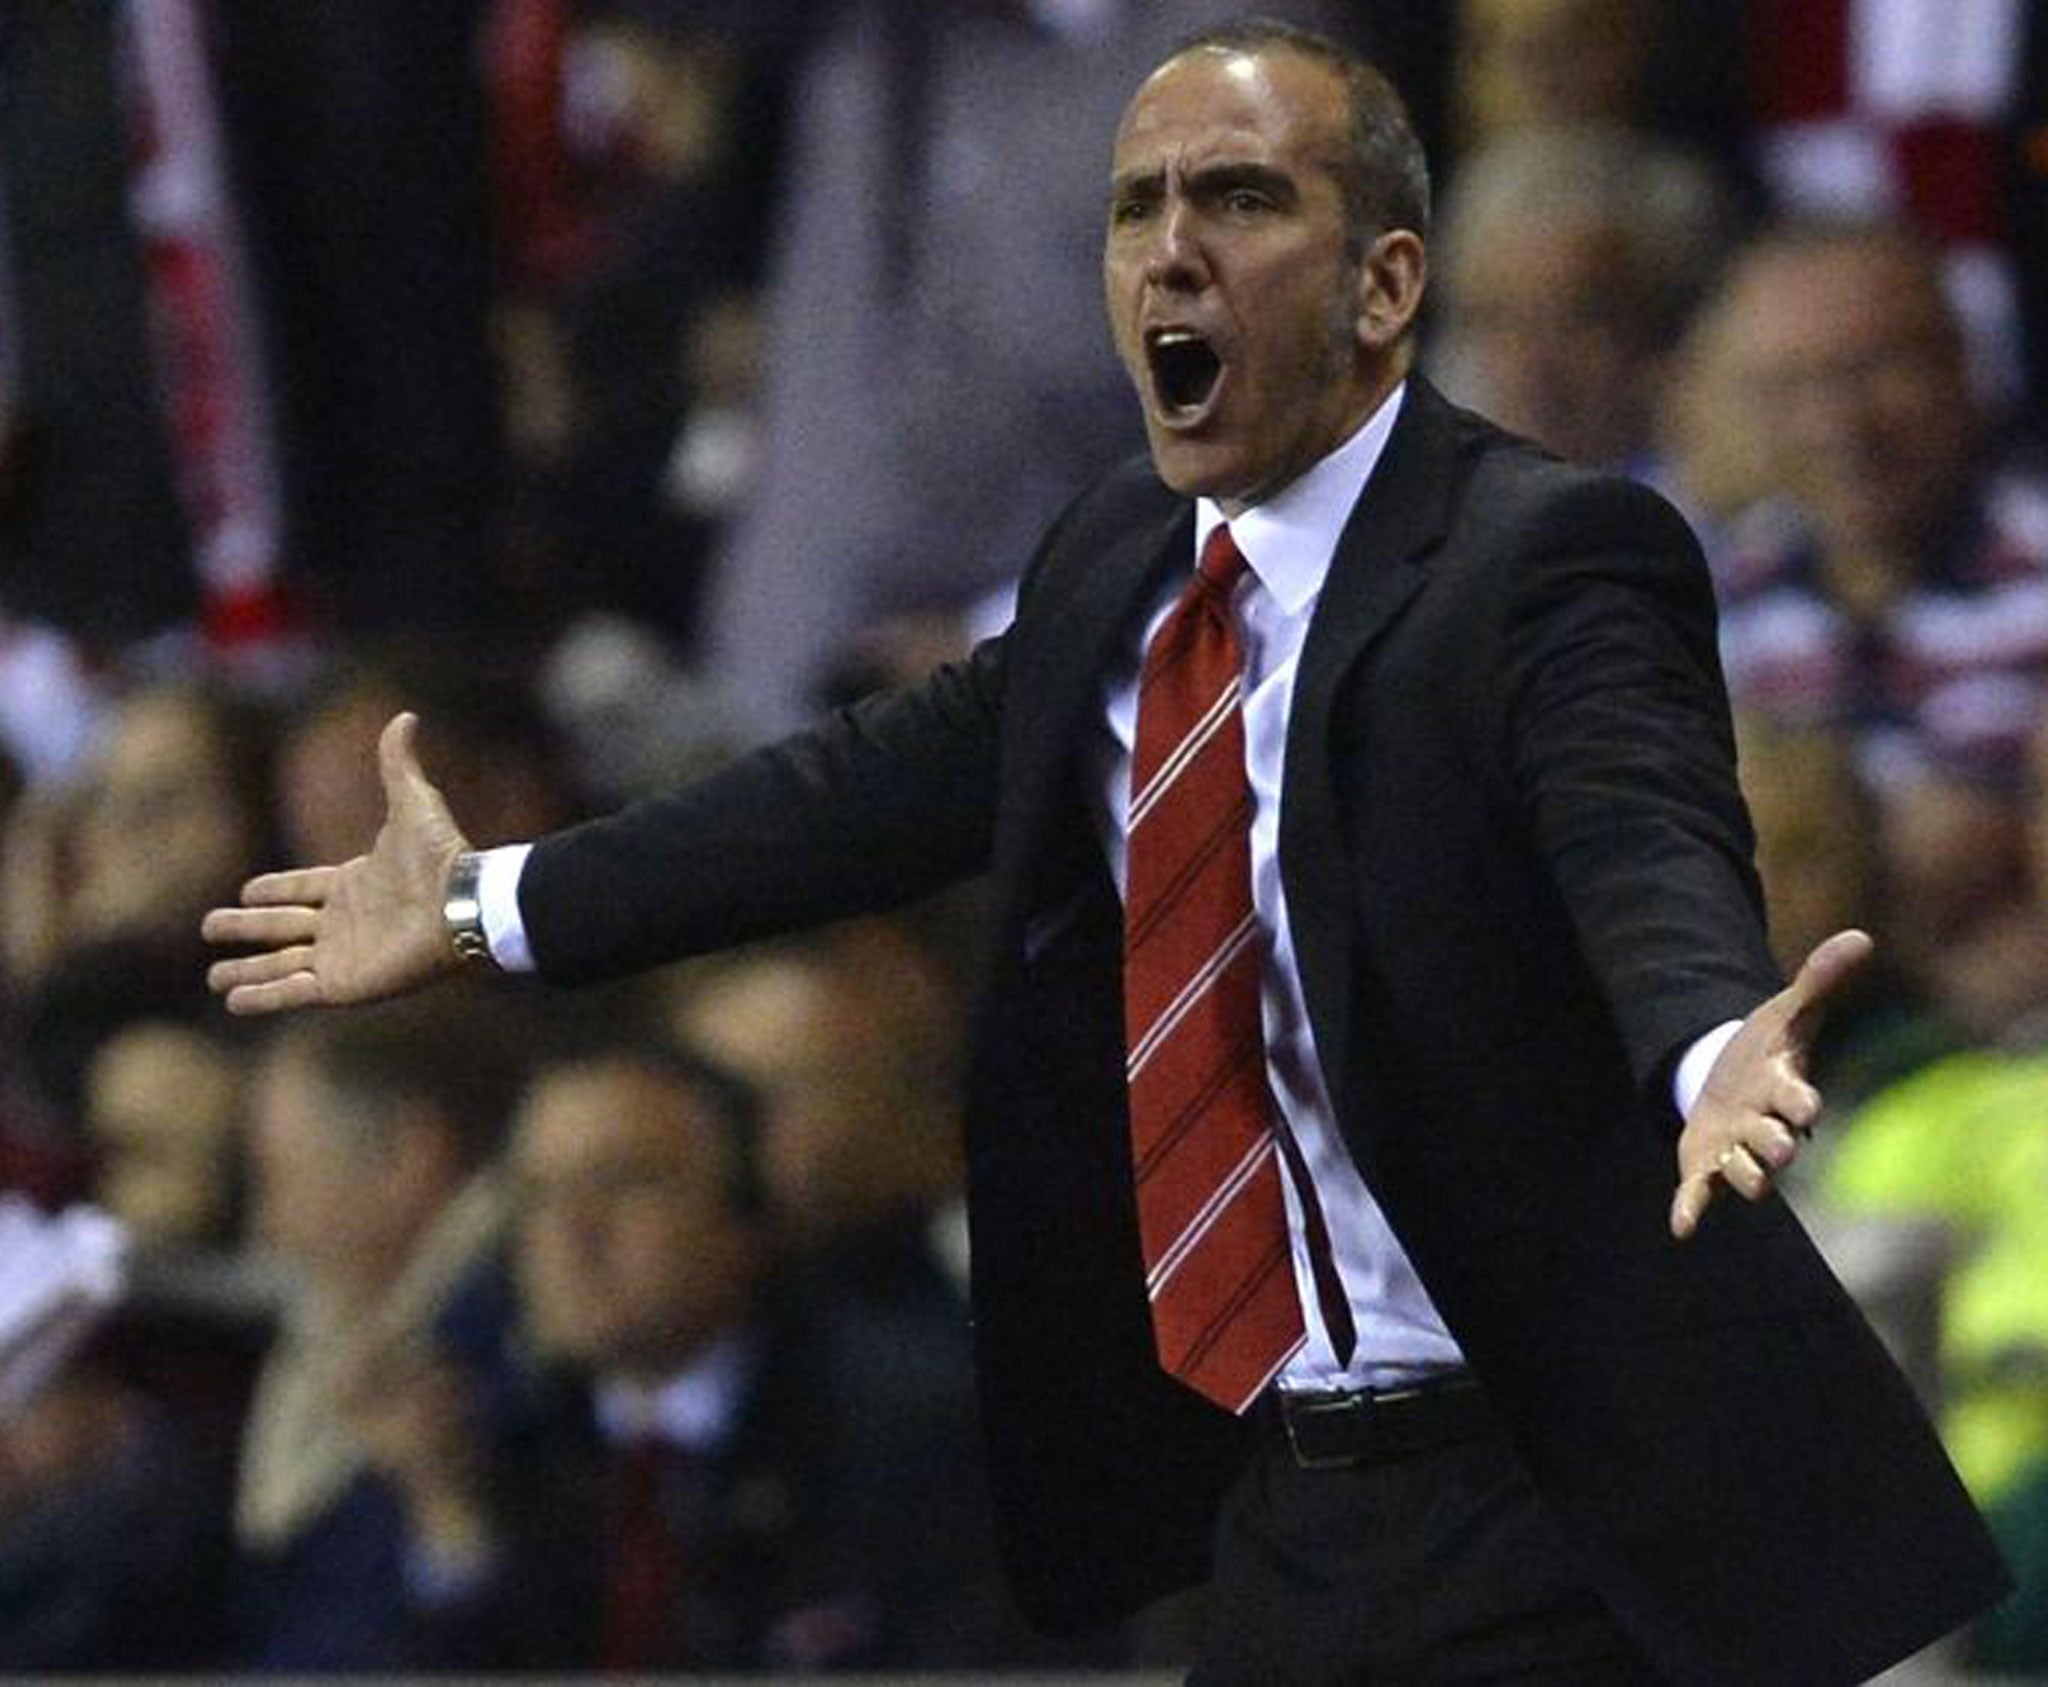 Sunderland's manager Paolo Di Canio reacts during their English Premier League soccer match against Stoke City in Sunderland